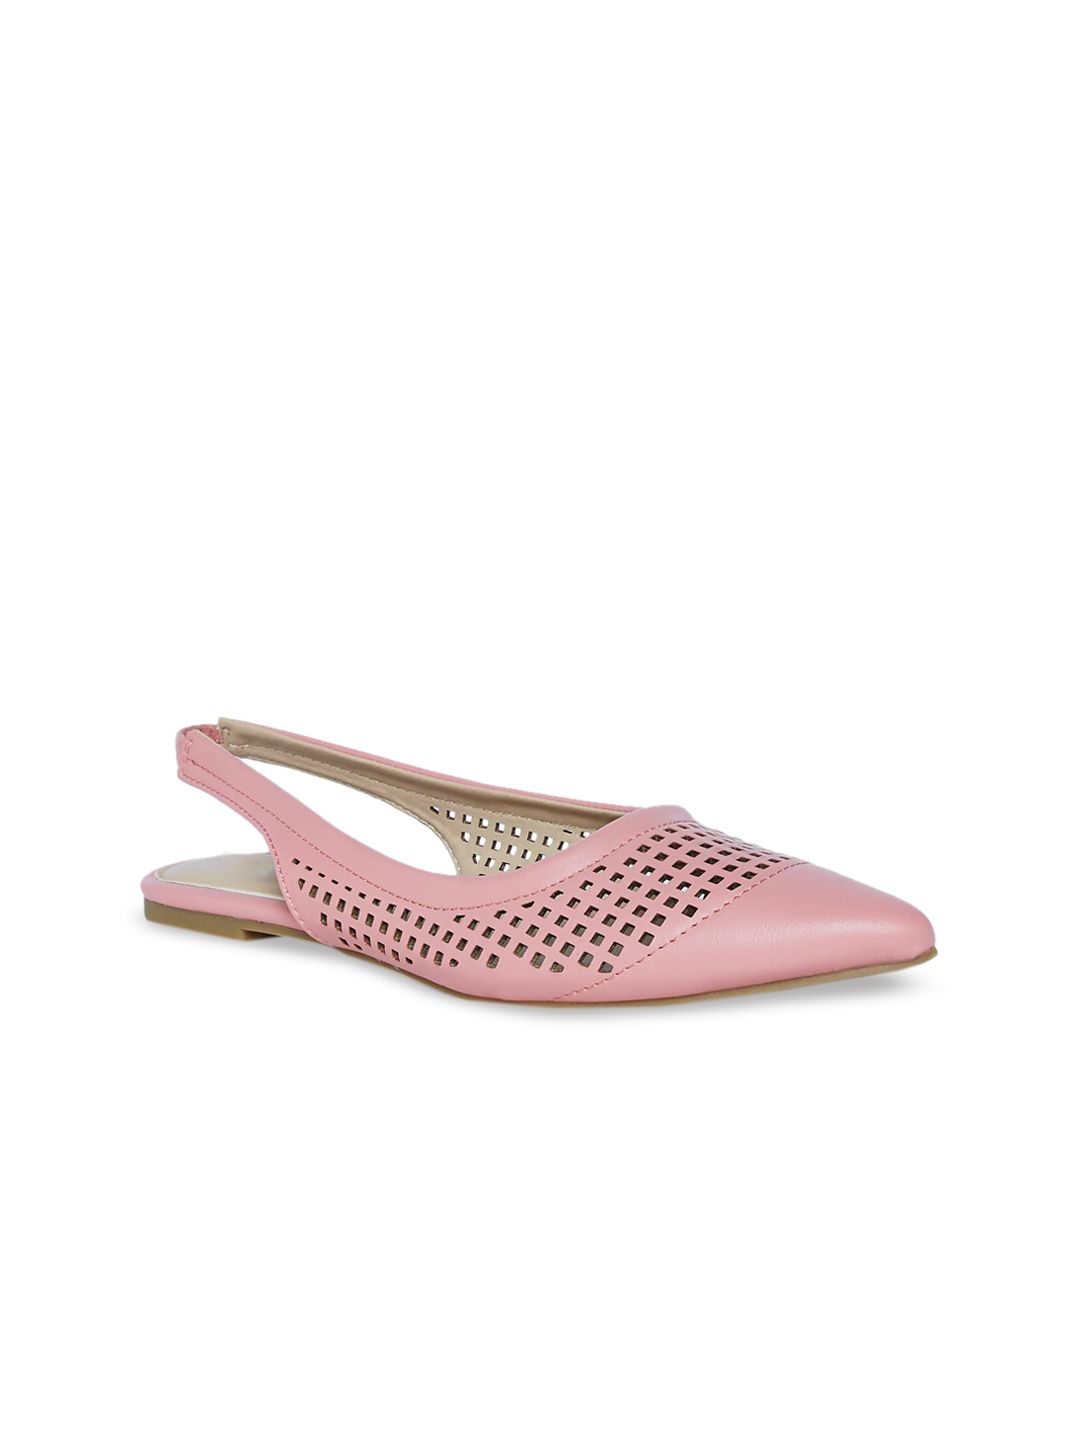 Forever Glam by Pantaloons Women Pink Ballerinas with Laser Cuts Flats Price in India